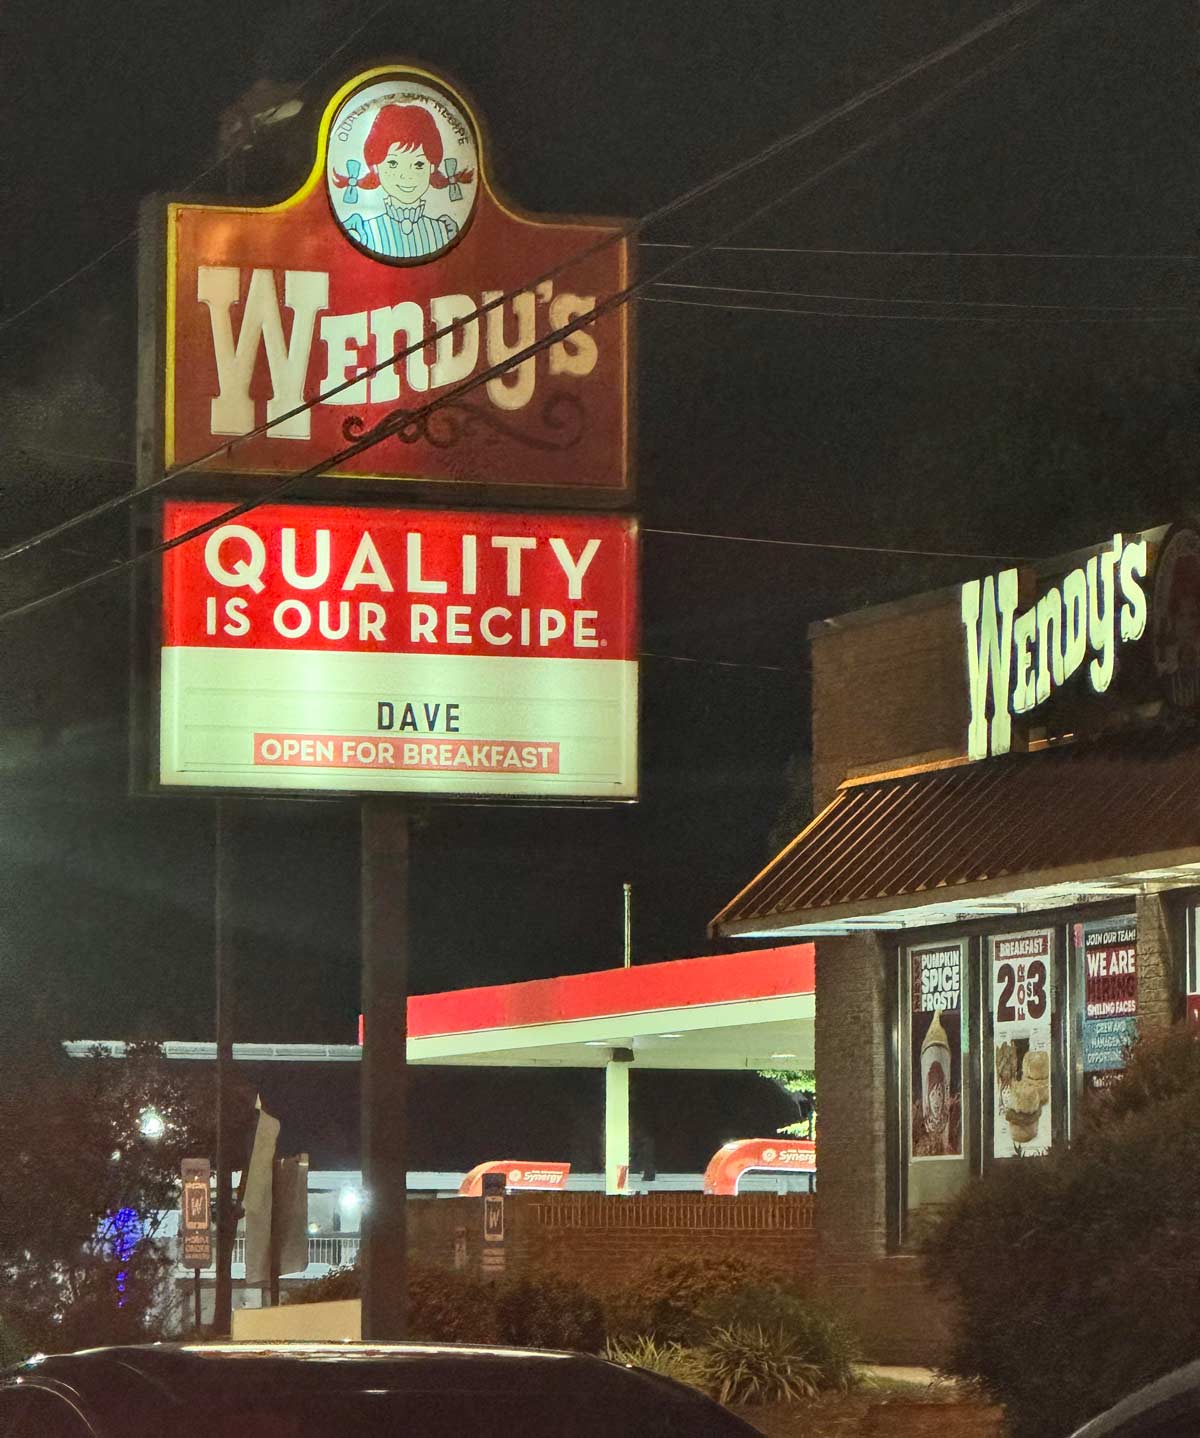 My local Wendy’s puts in minimal effort on their sign